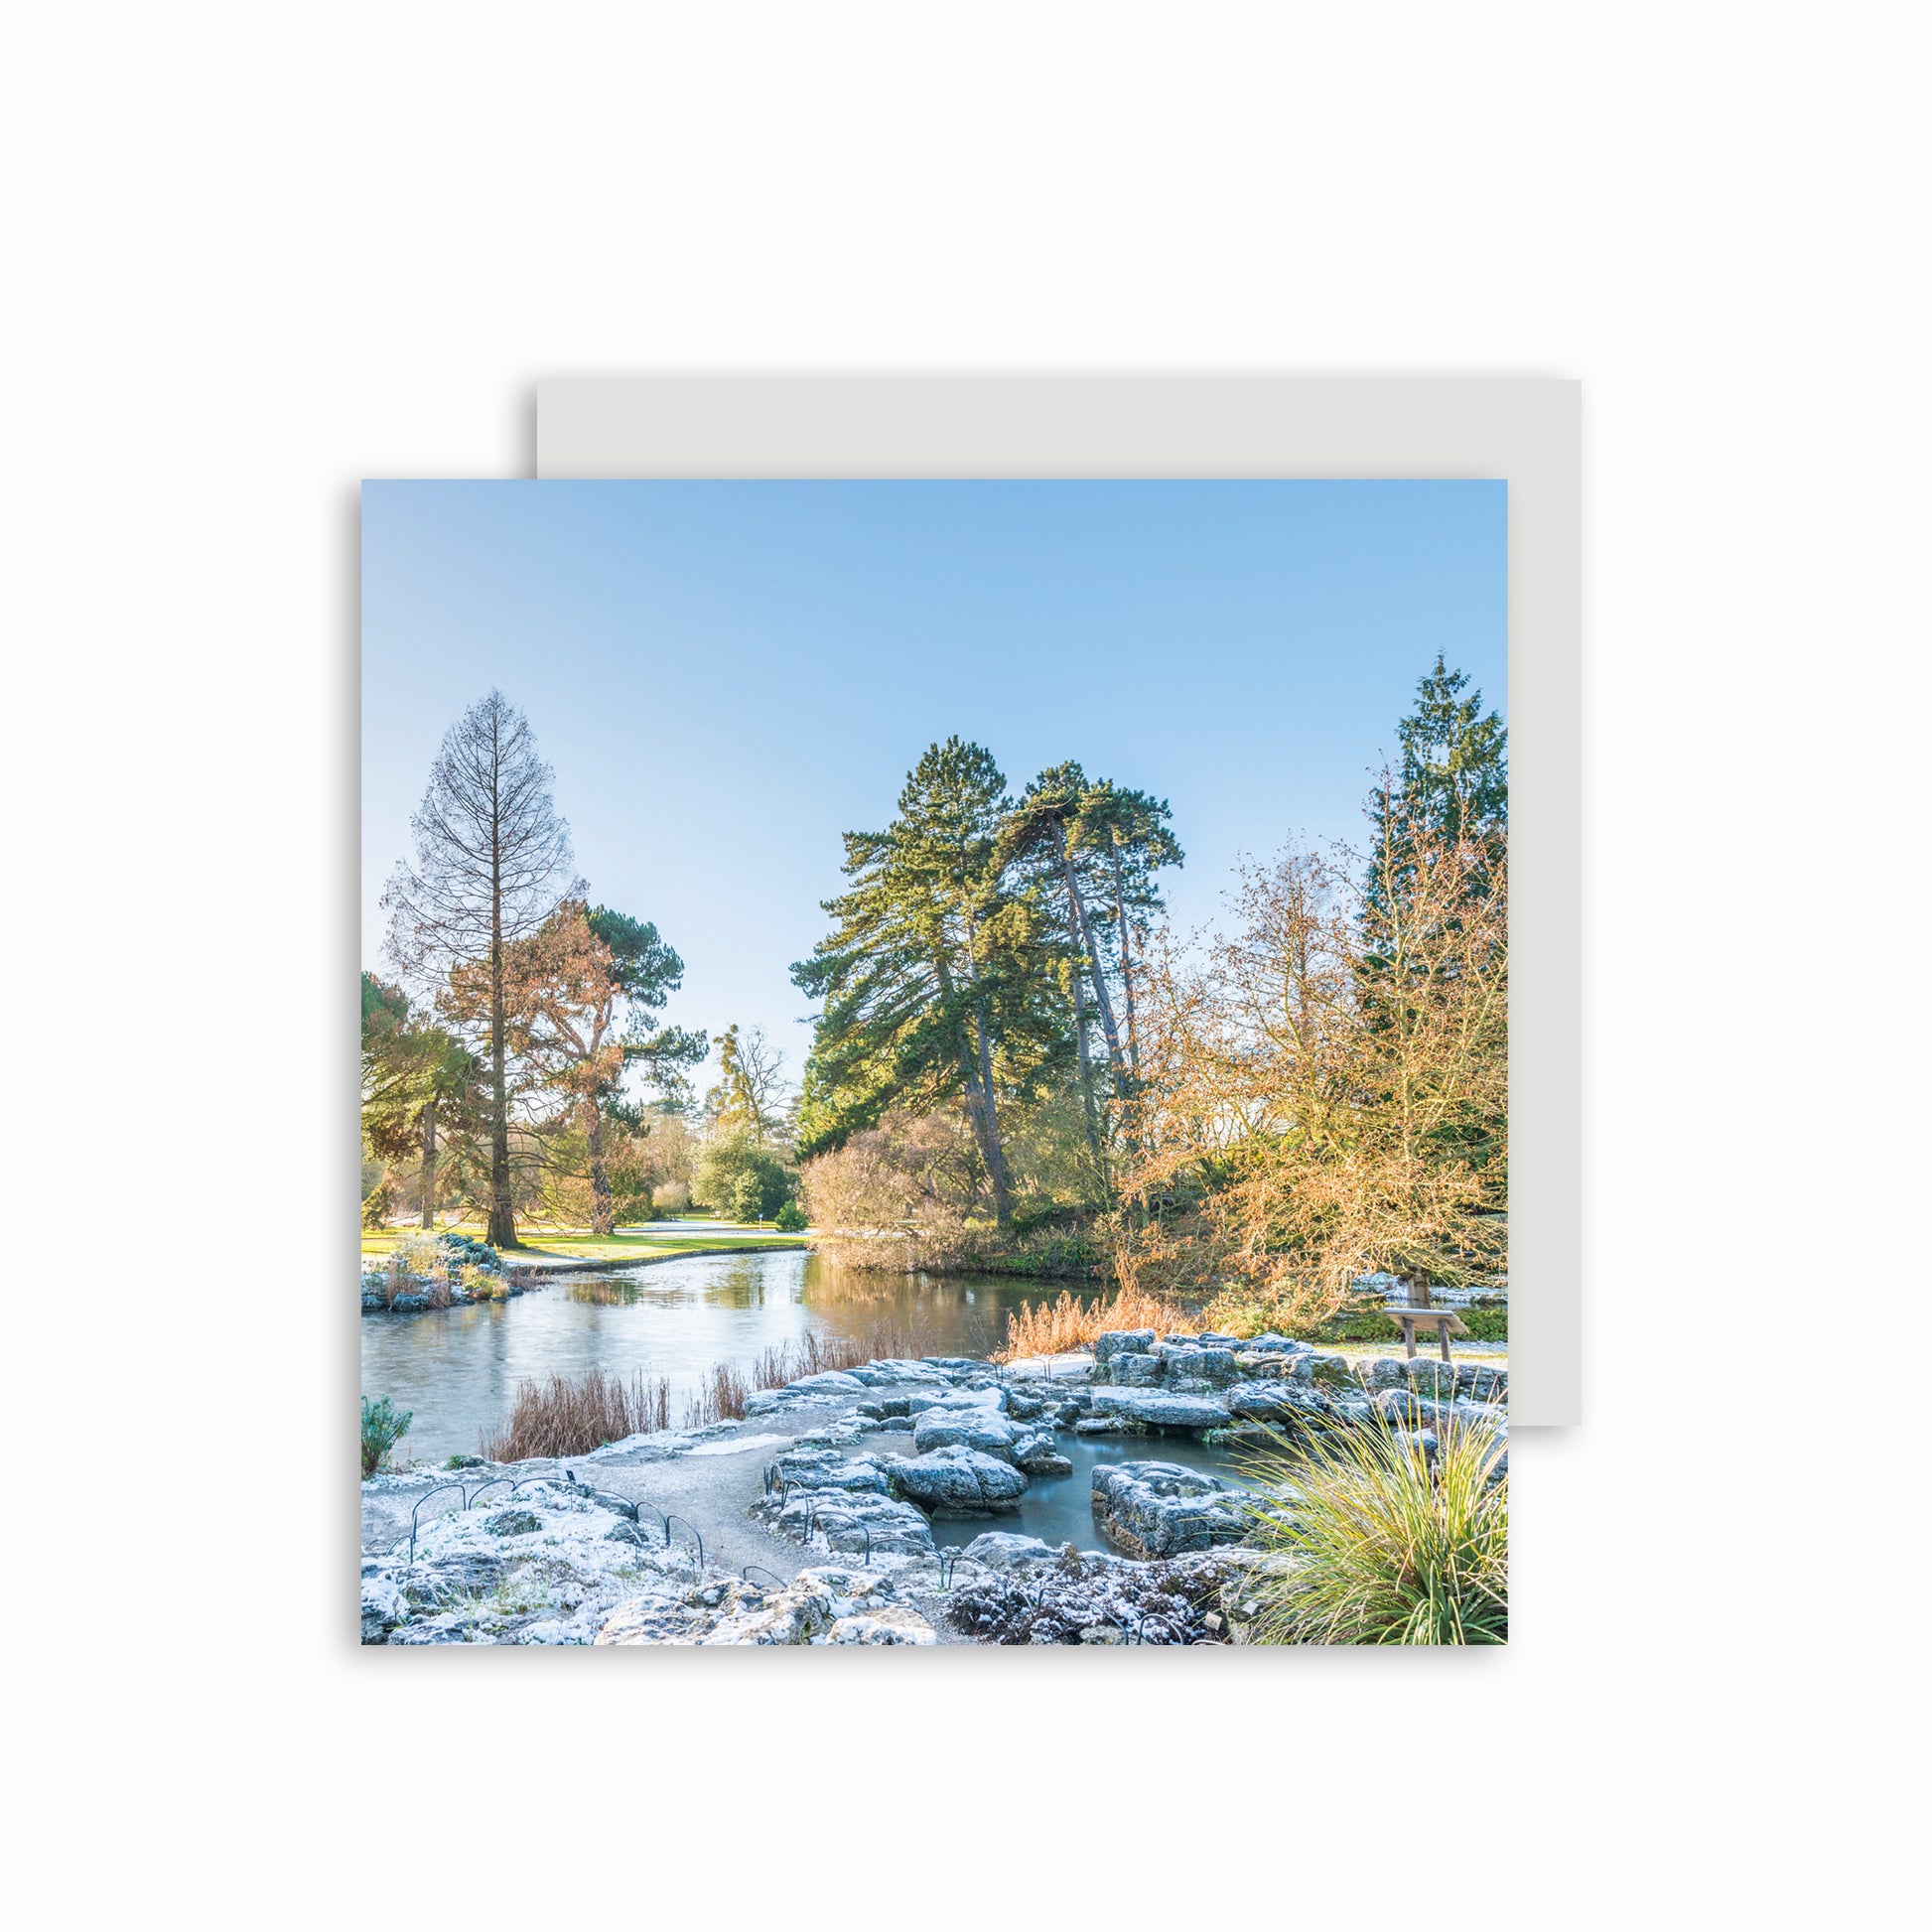 Christmas card featuring image of the Lake and Rock Garden with snow at the Botanic Garden Cambridge.